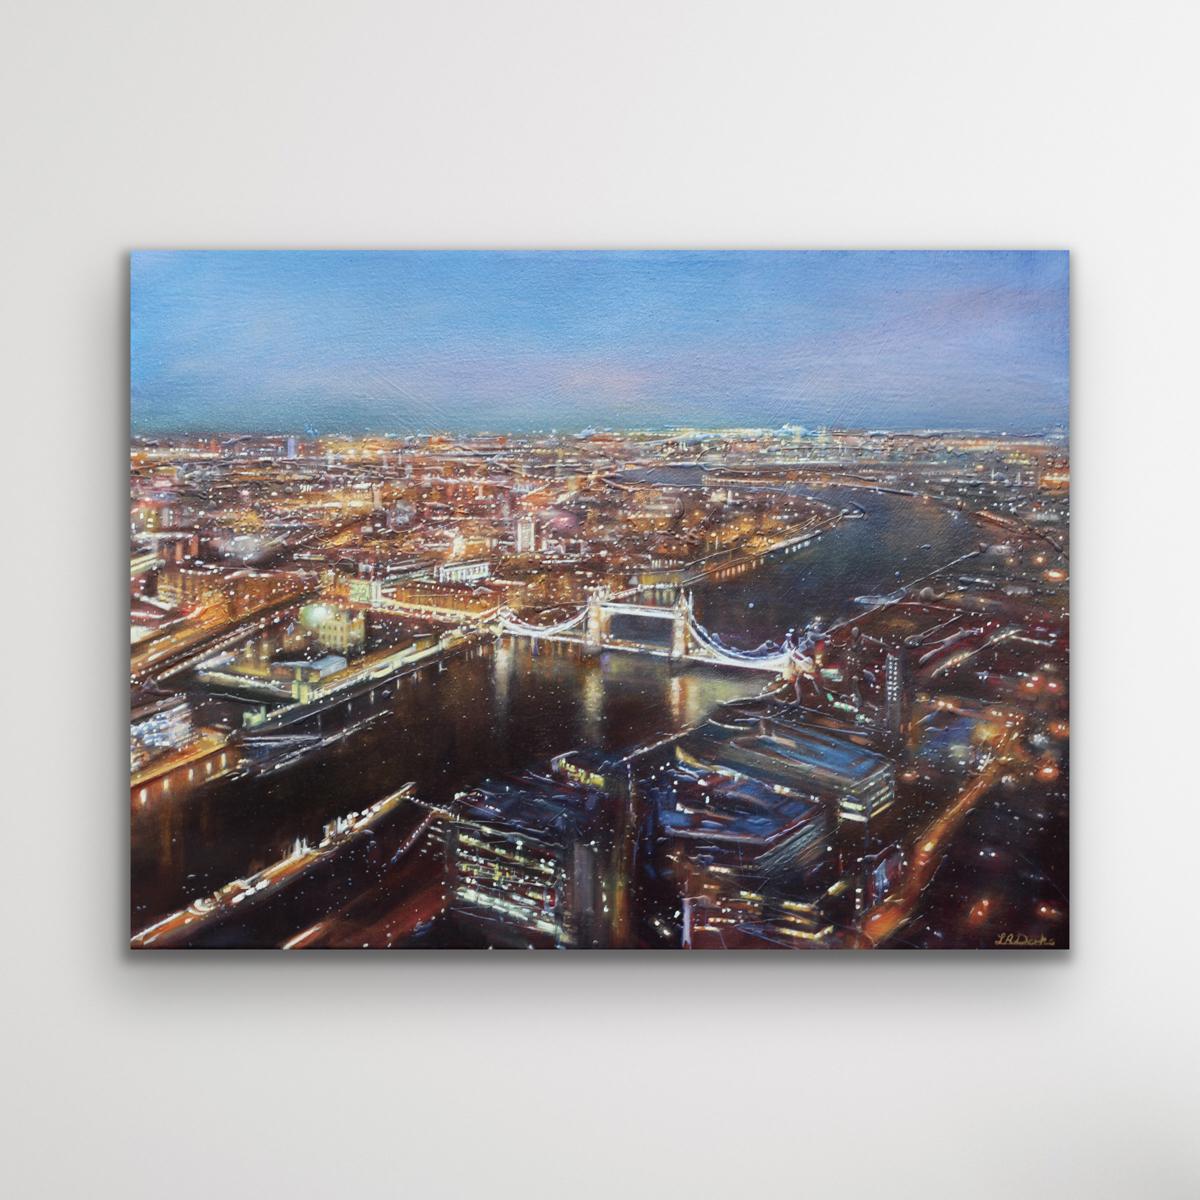 This painting is an image of Tower Bridge from the Shard. Oil and enamel on canvas. Loved all the twinkling lights and how Tower Bridge dominated the landscape.

Discover original artwork by Lesley Anne Derks with Wychwood Art online and in our